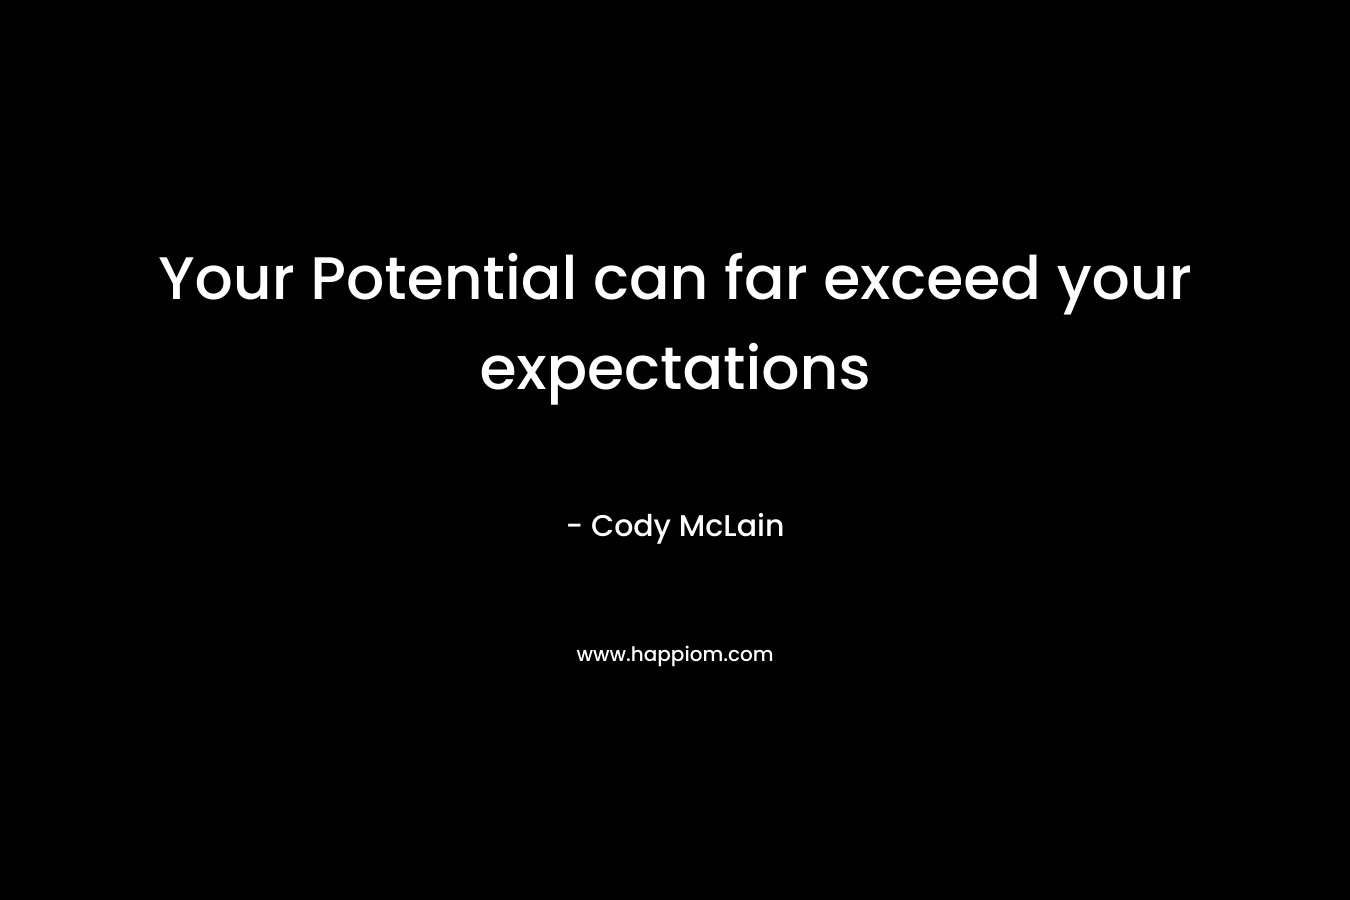 Your Potential can far exceed your expectations